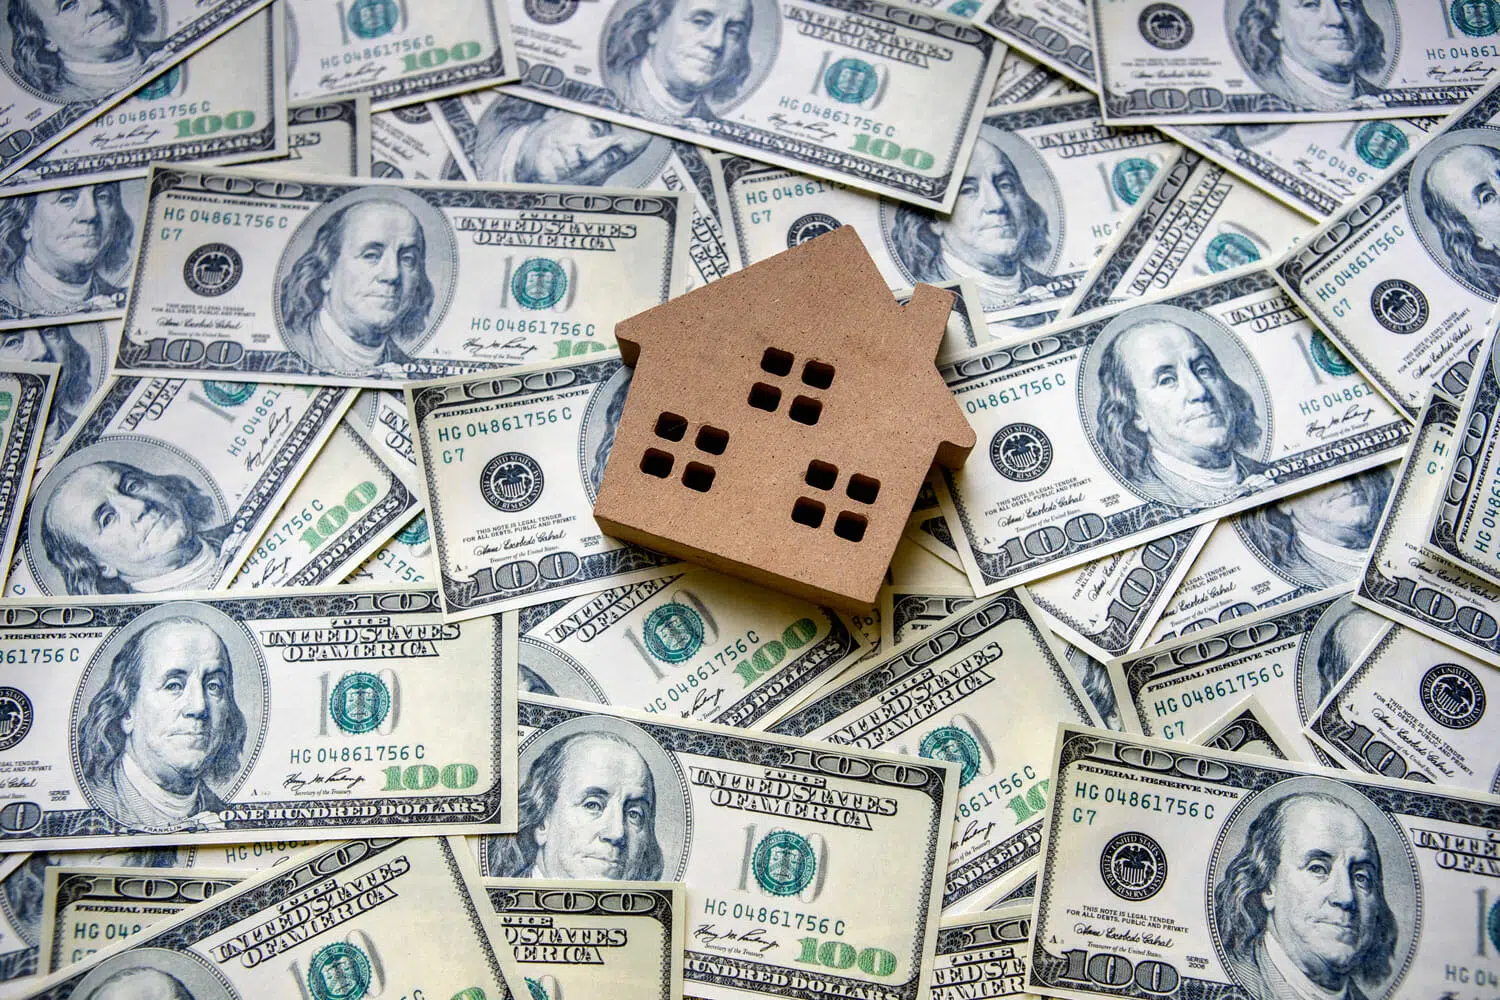 Virginia divorce - do we have to refinance our house?